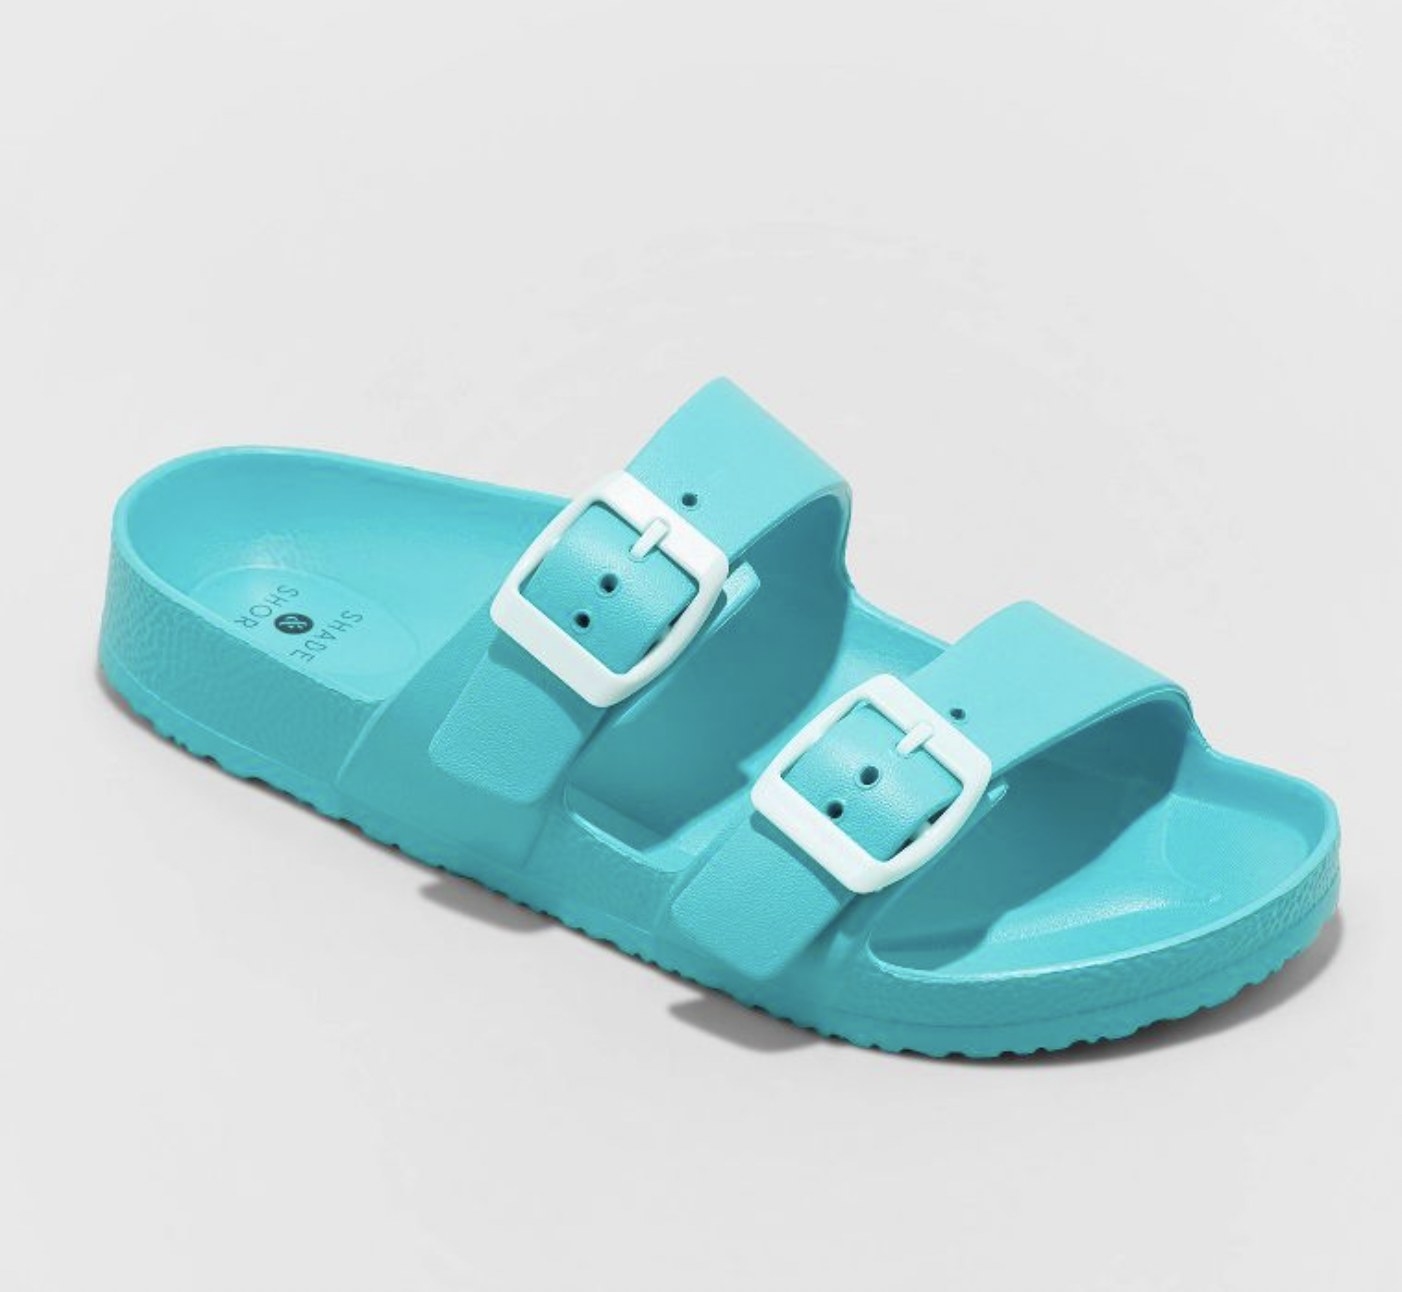 the sandals in teal blue